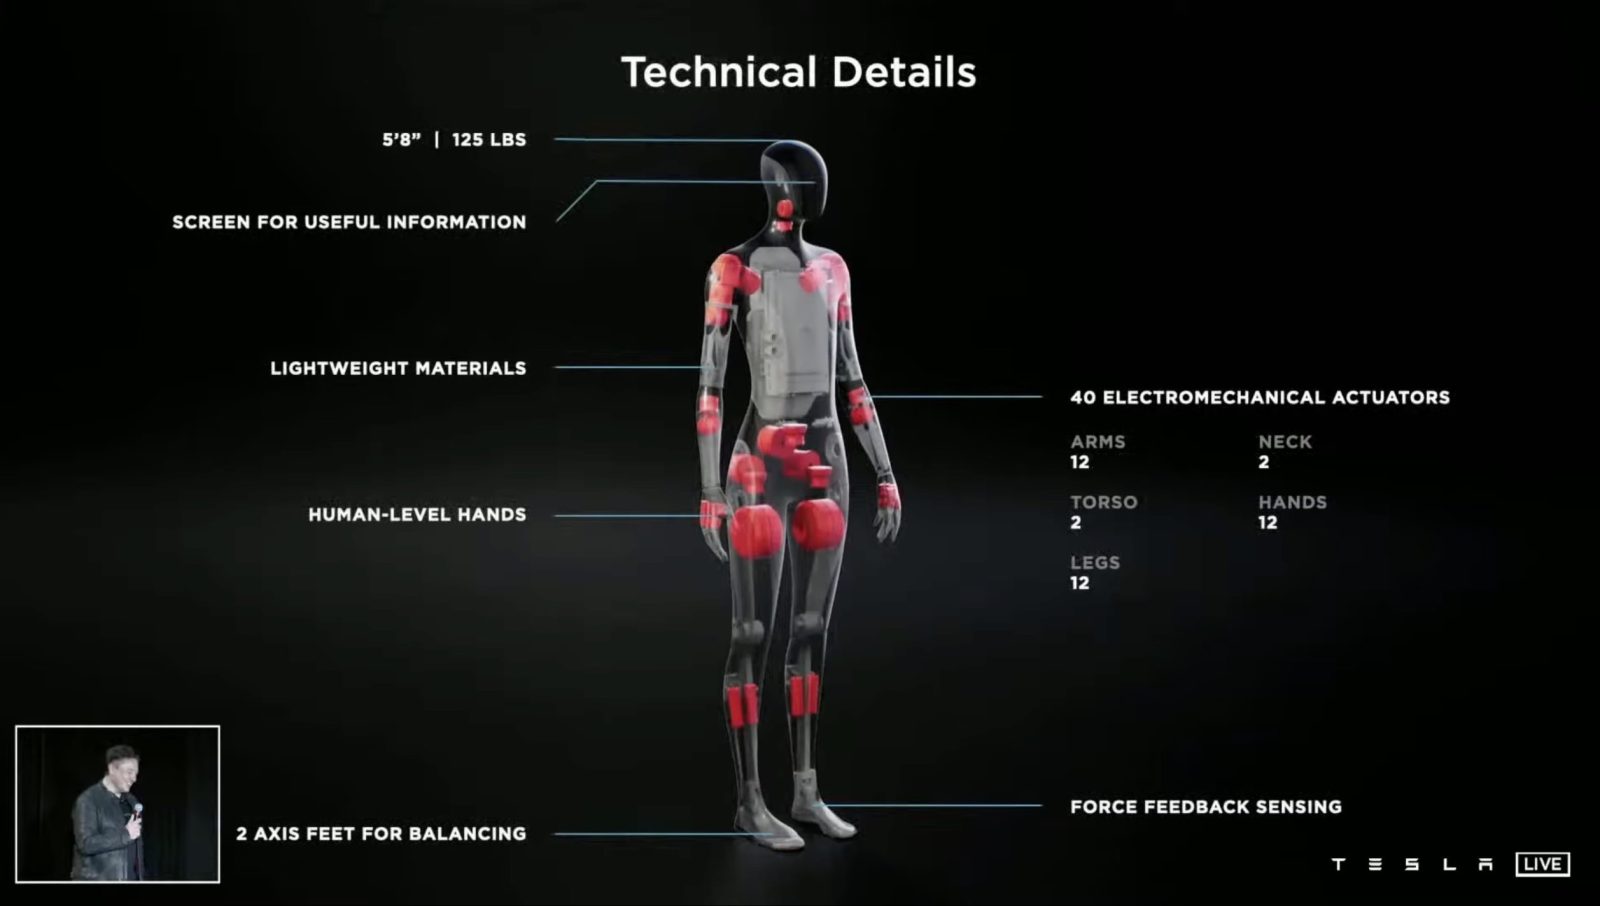 Tesla Optimus Humanoid Robot Most Important Product In Development